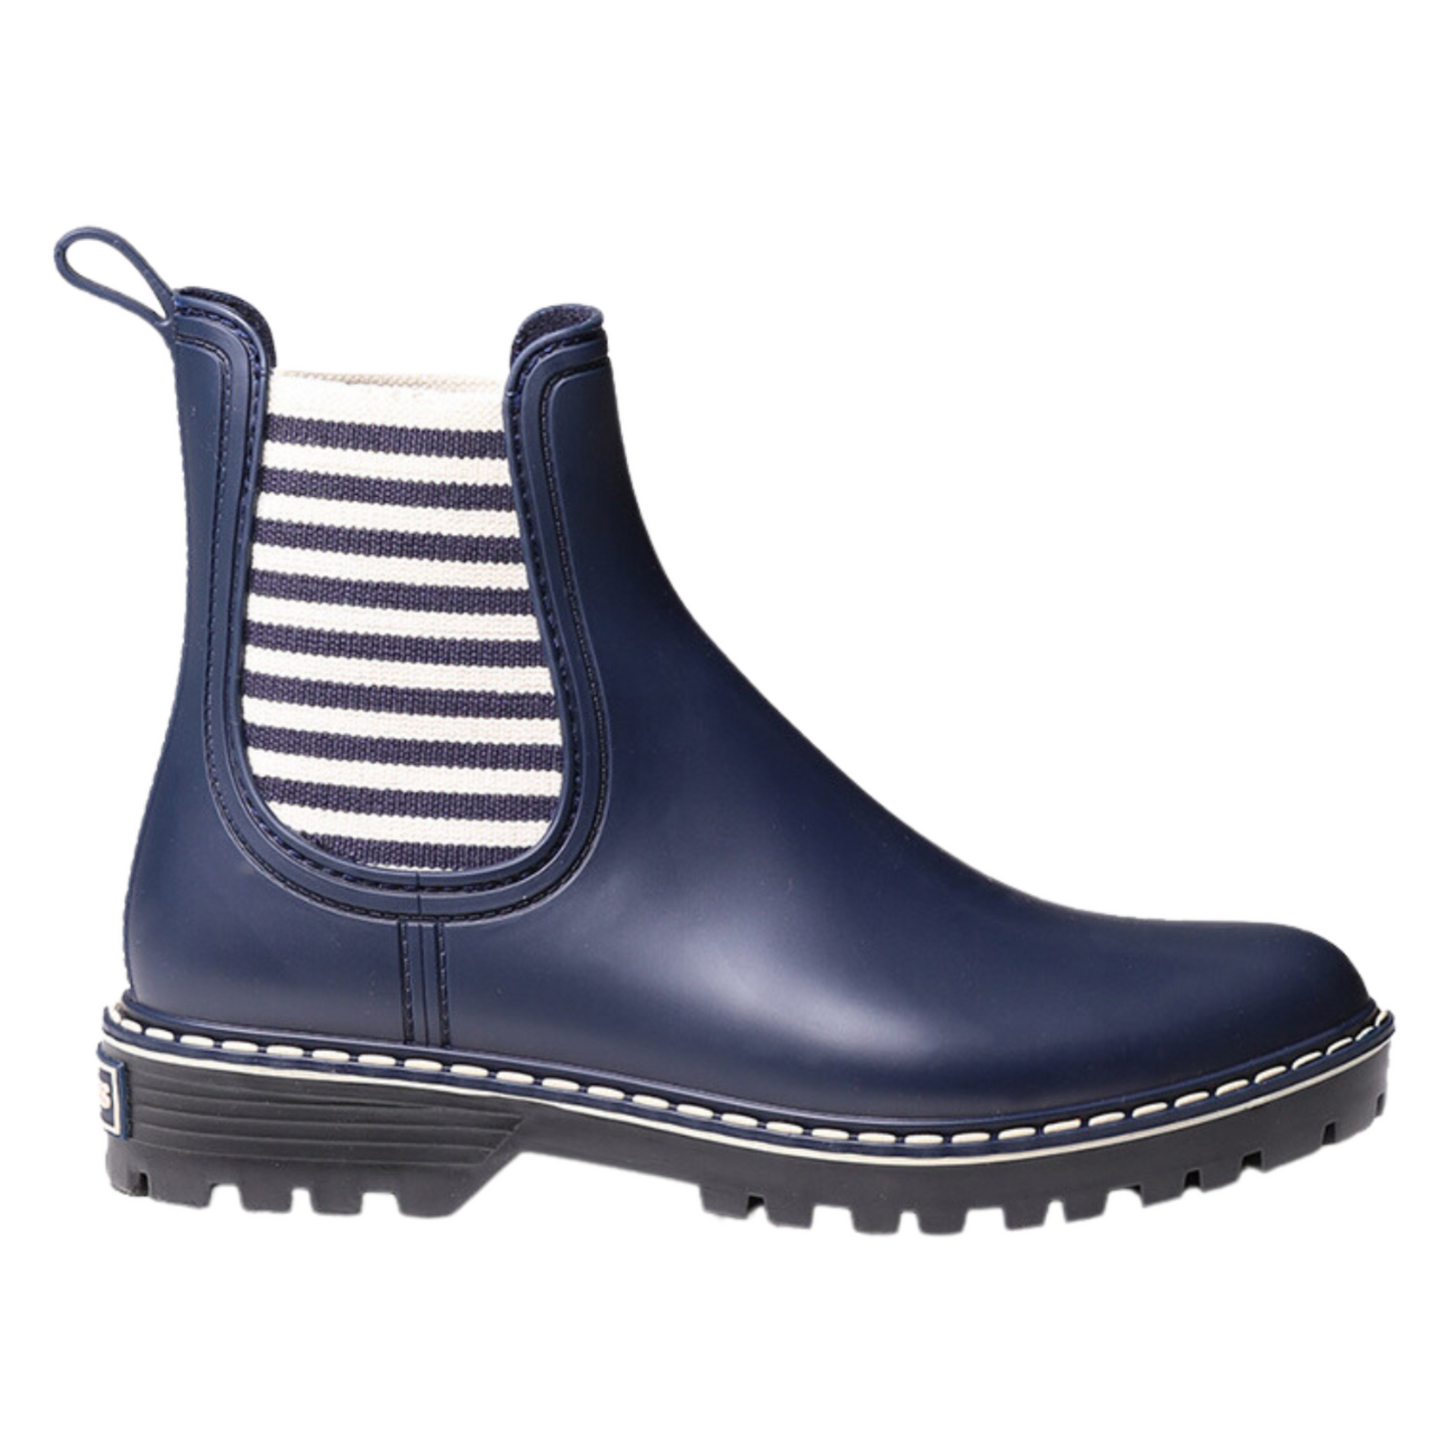 Right facing view of short navy rain boot with navy and white striped elastic side gores and black rubber outsole